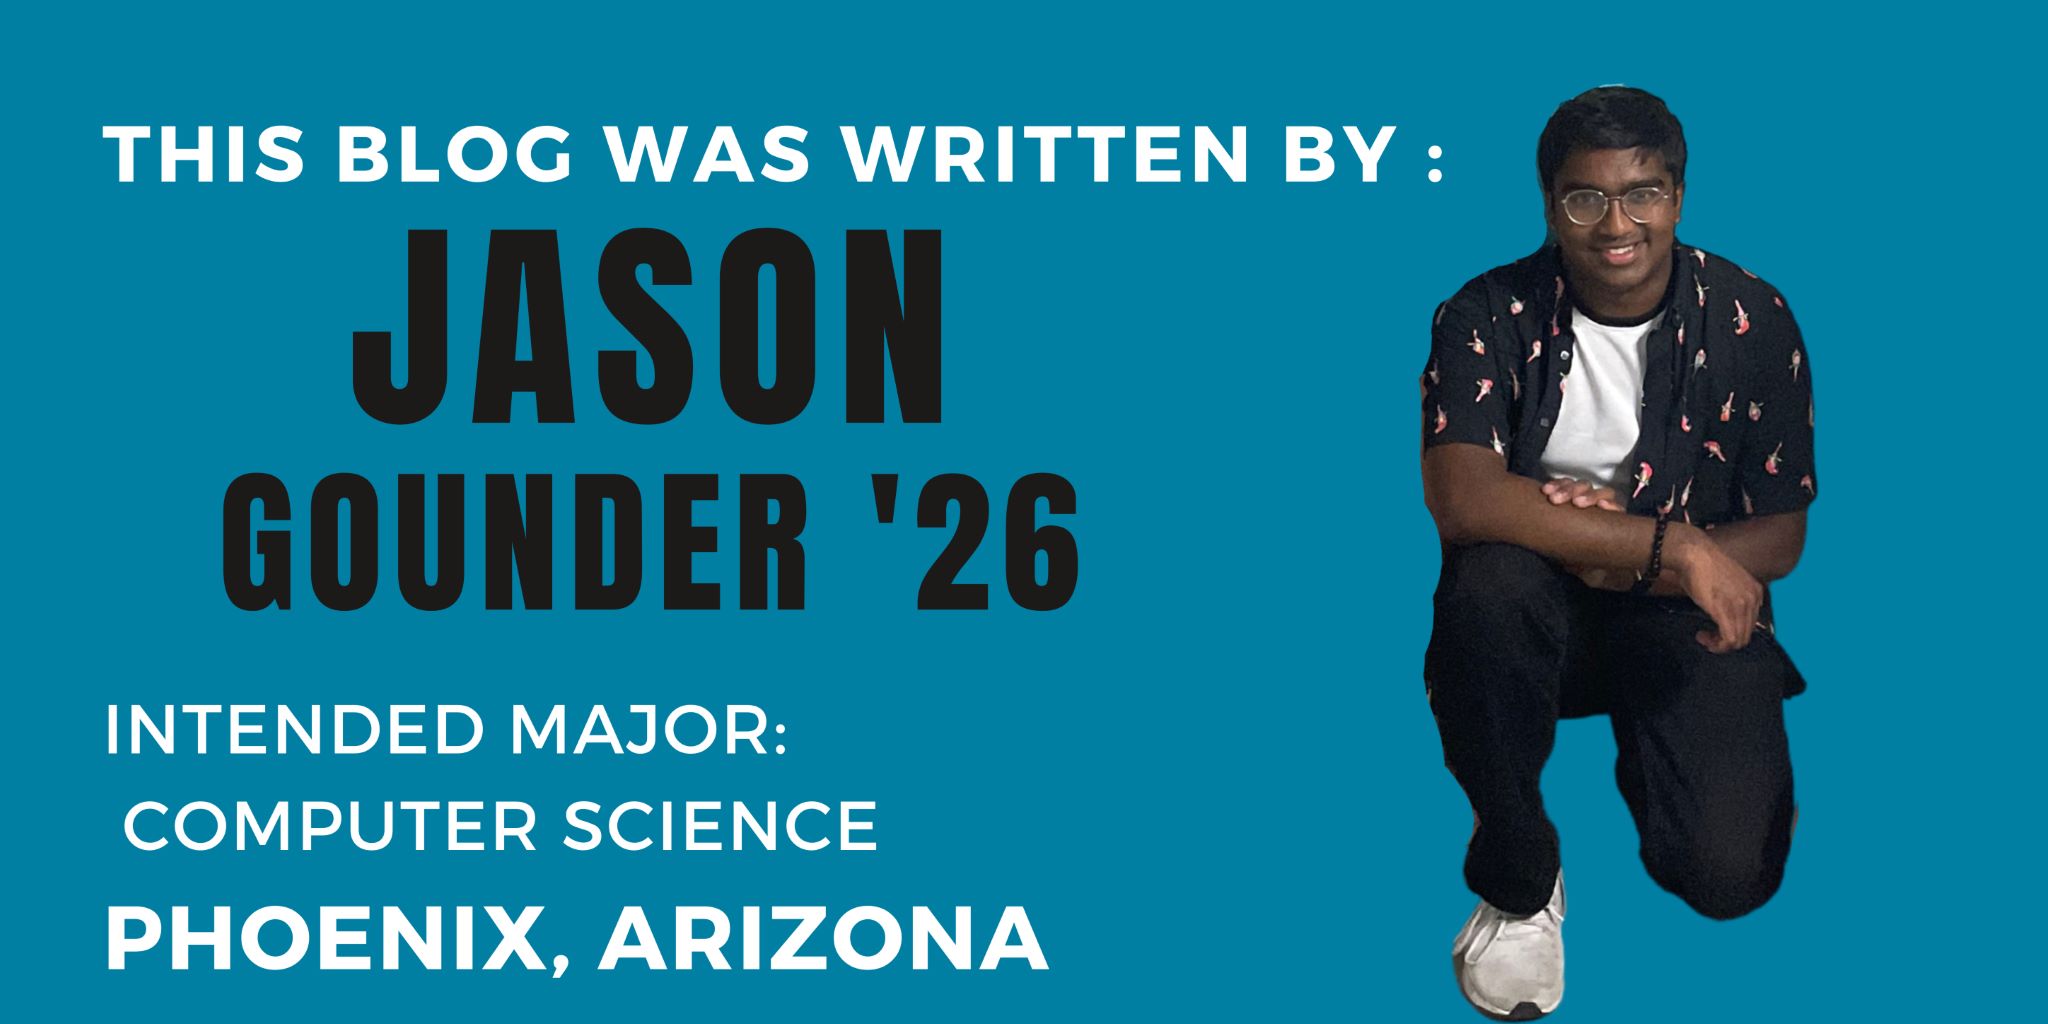 This blog was written by: Jason Gounder '26. Intended major: Computer Science. Pheonix, Arizona.